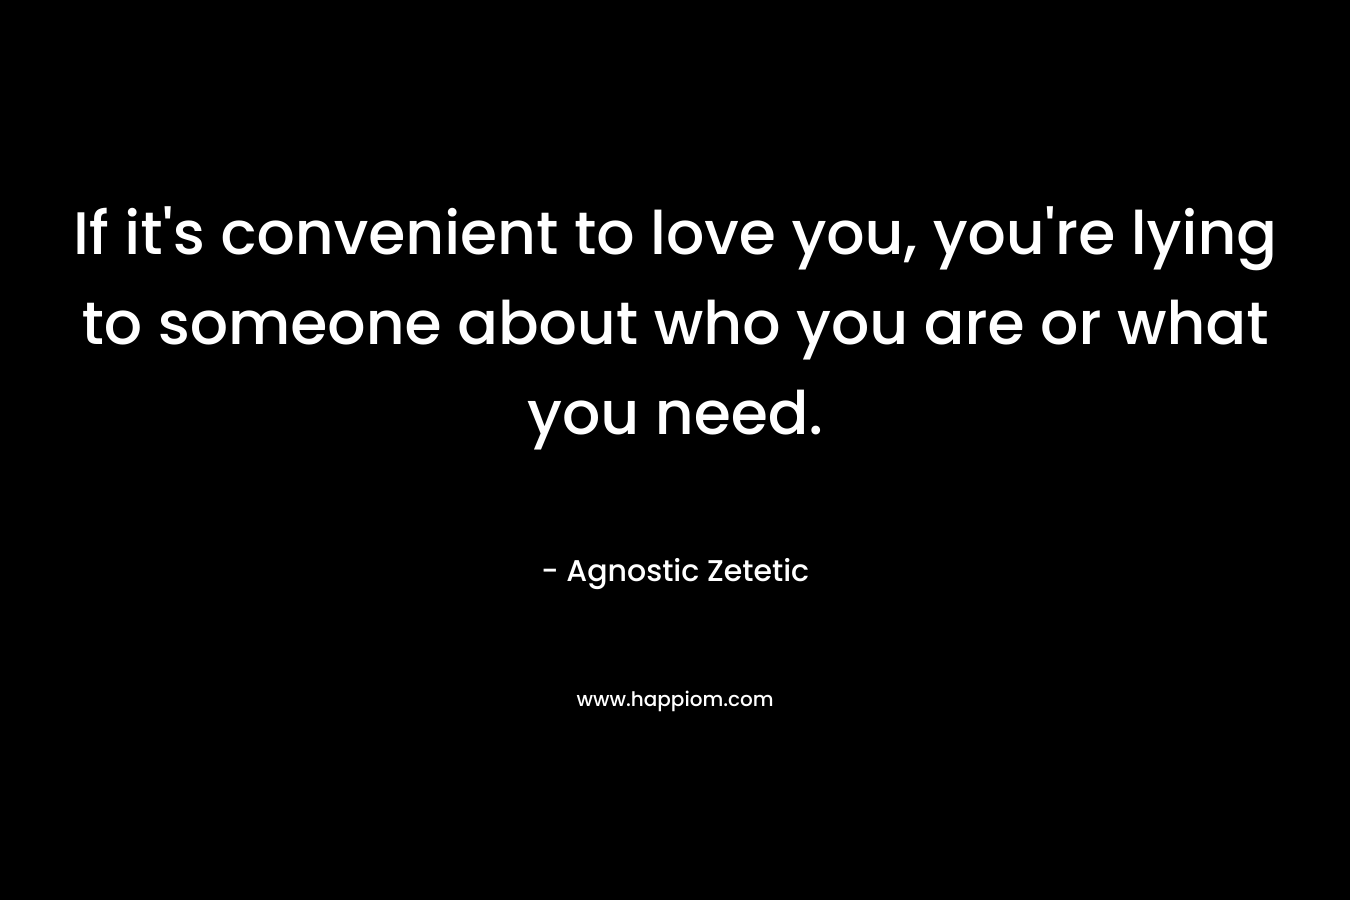 If it’s convenient to love you, you’re lying to someone about who you are or what you need. – Agnostic Zetetic